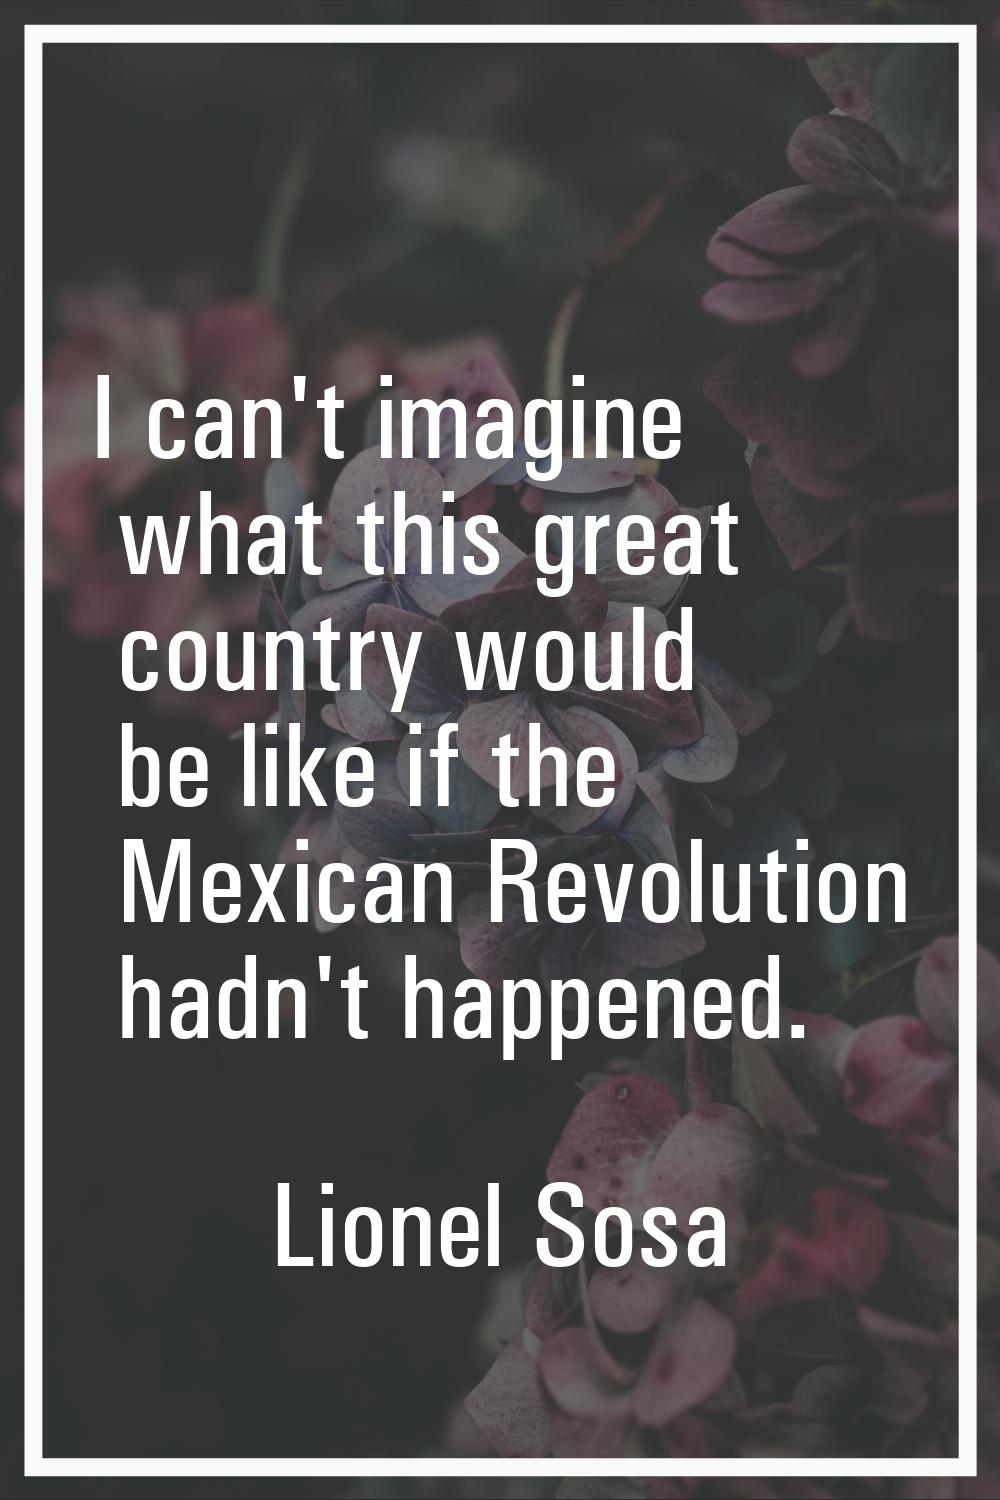 I can't imagine what this great country would be like if the Mexican Revolution hadn't happened.